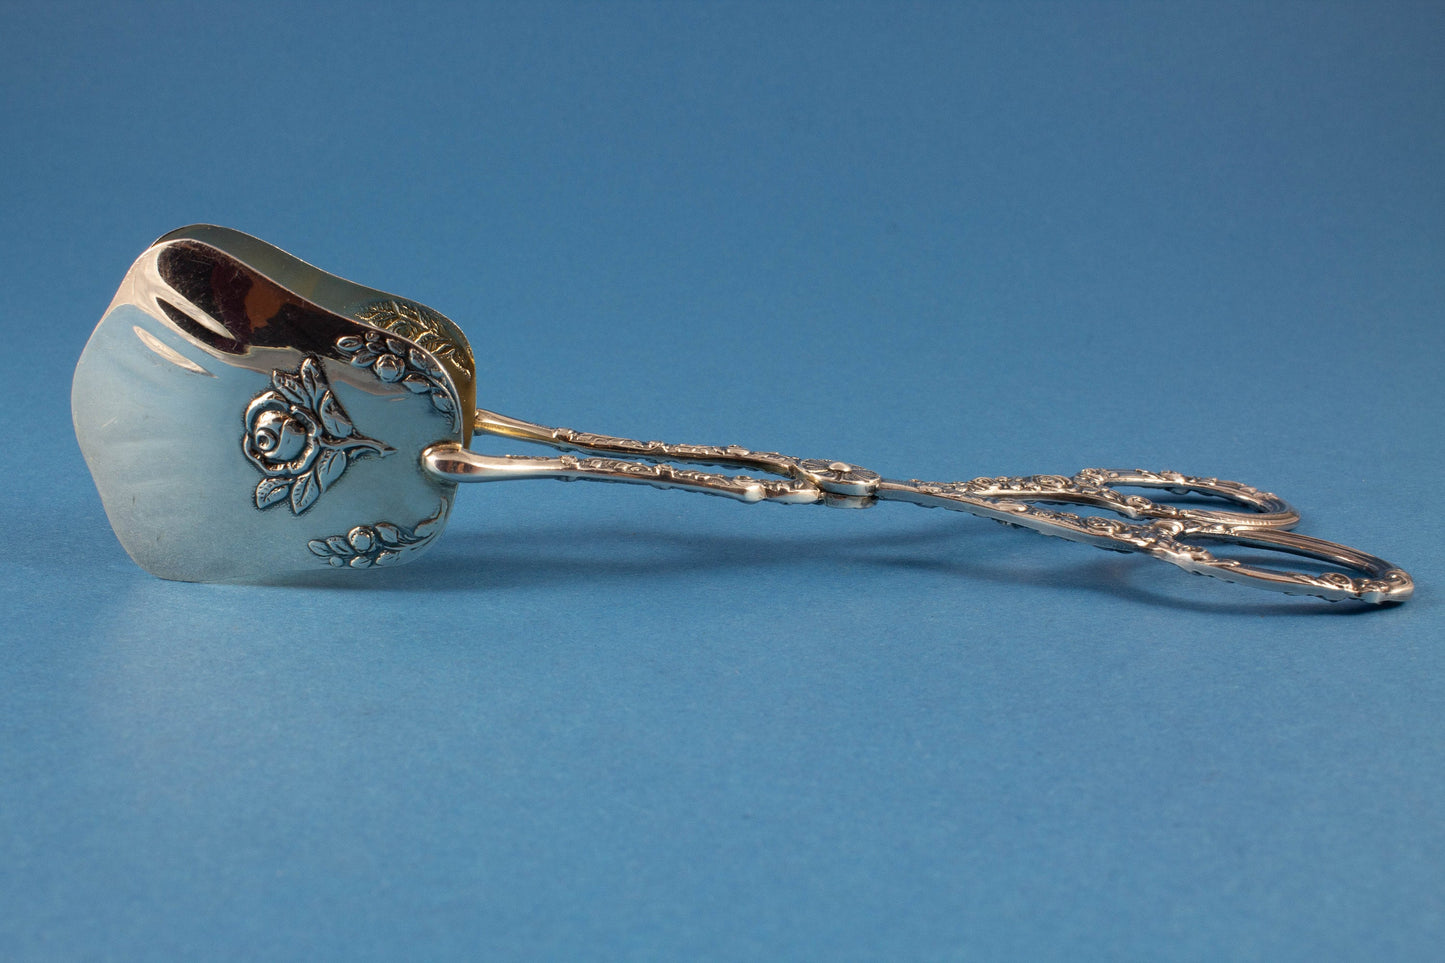 Wonderful silver pastry tongs from the Reiner brothers with a fine floral pattern